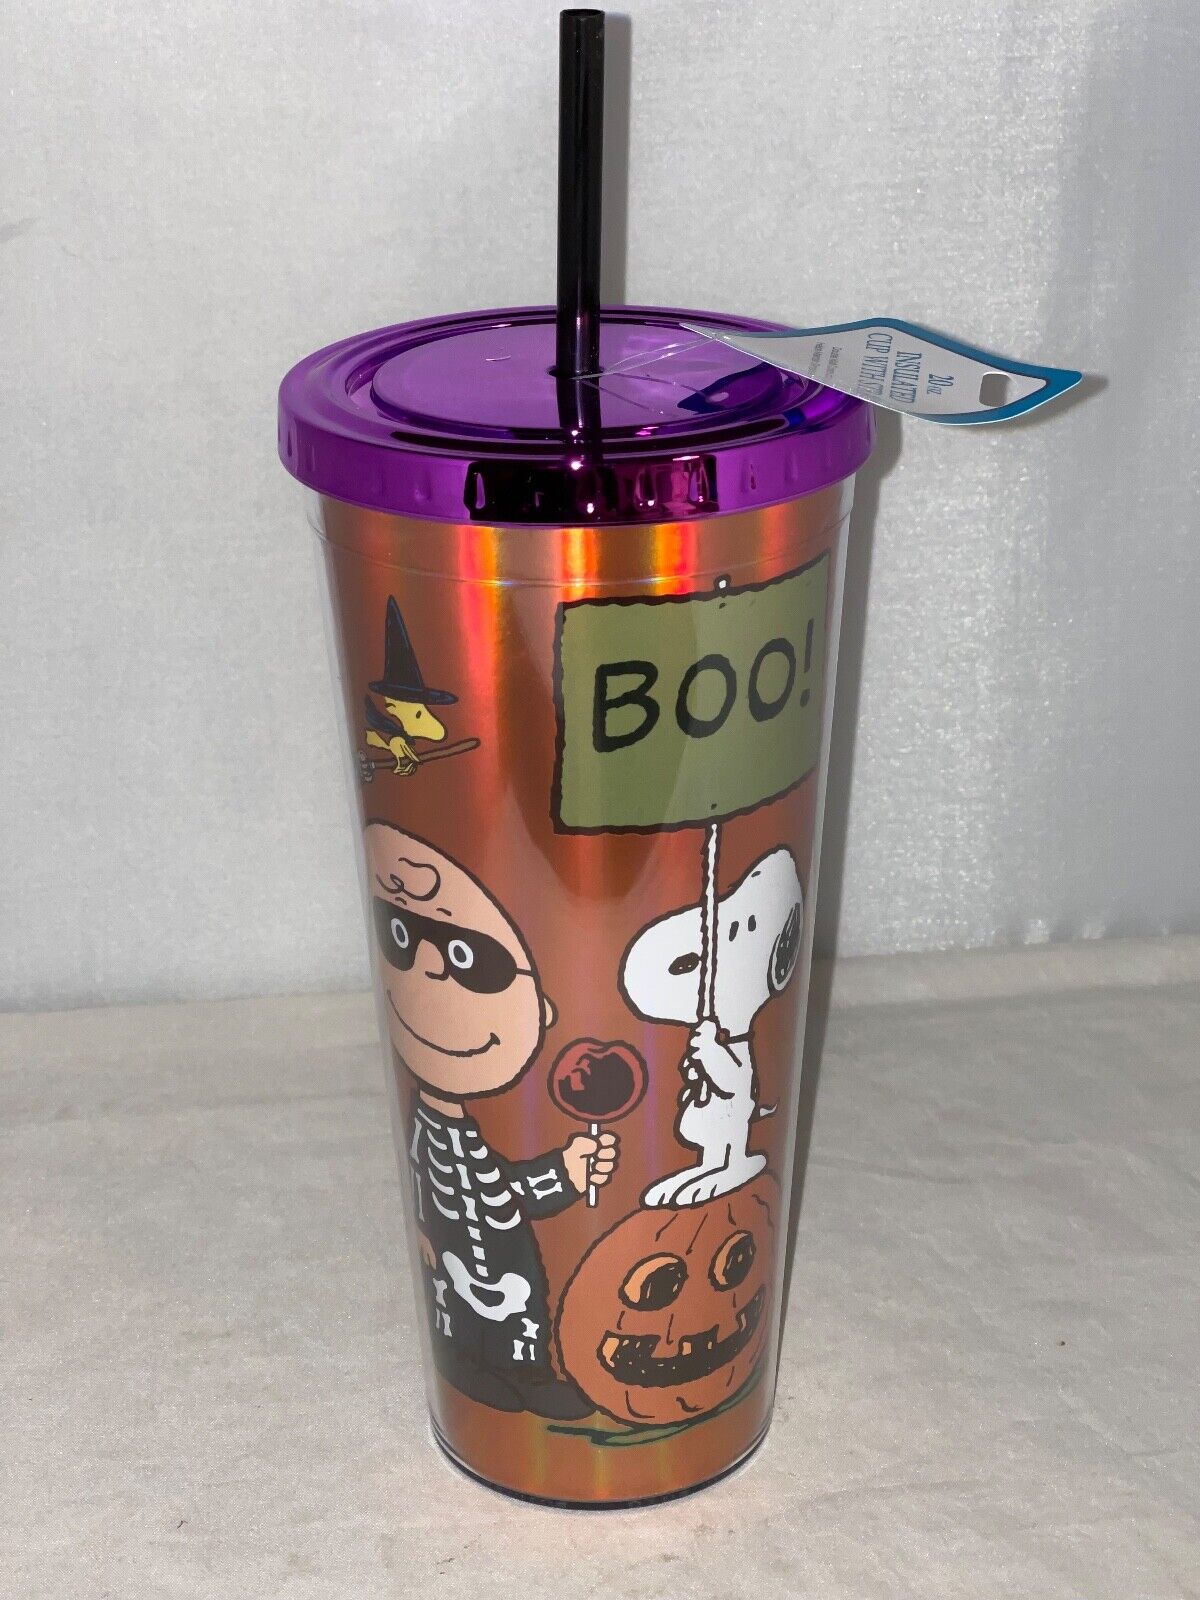 Peanuts Boo Snoopy & Charlie Brown Halloween 20 oz. Foil Travel Cup w/ Straw-New